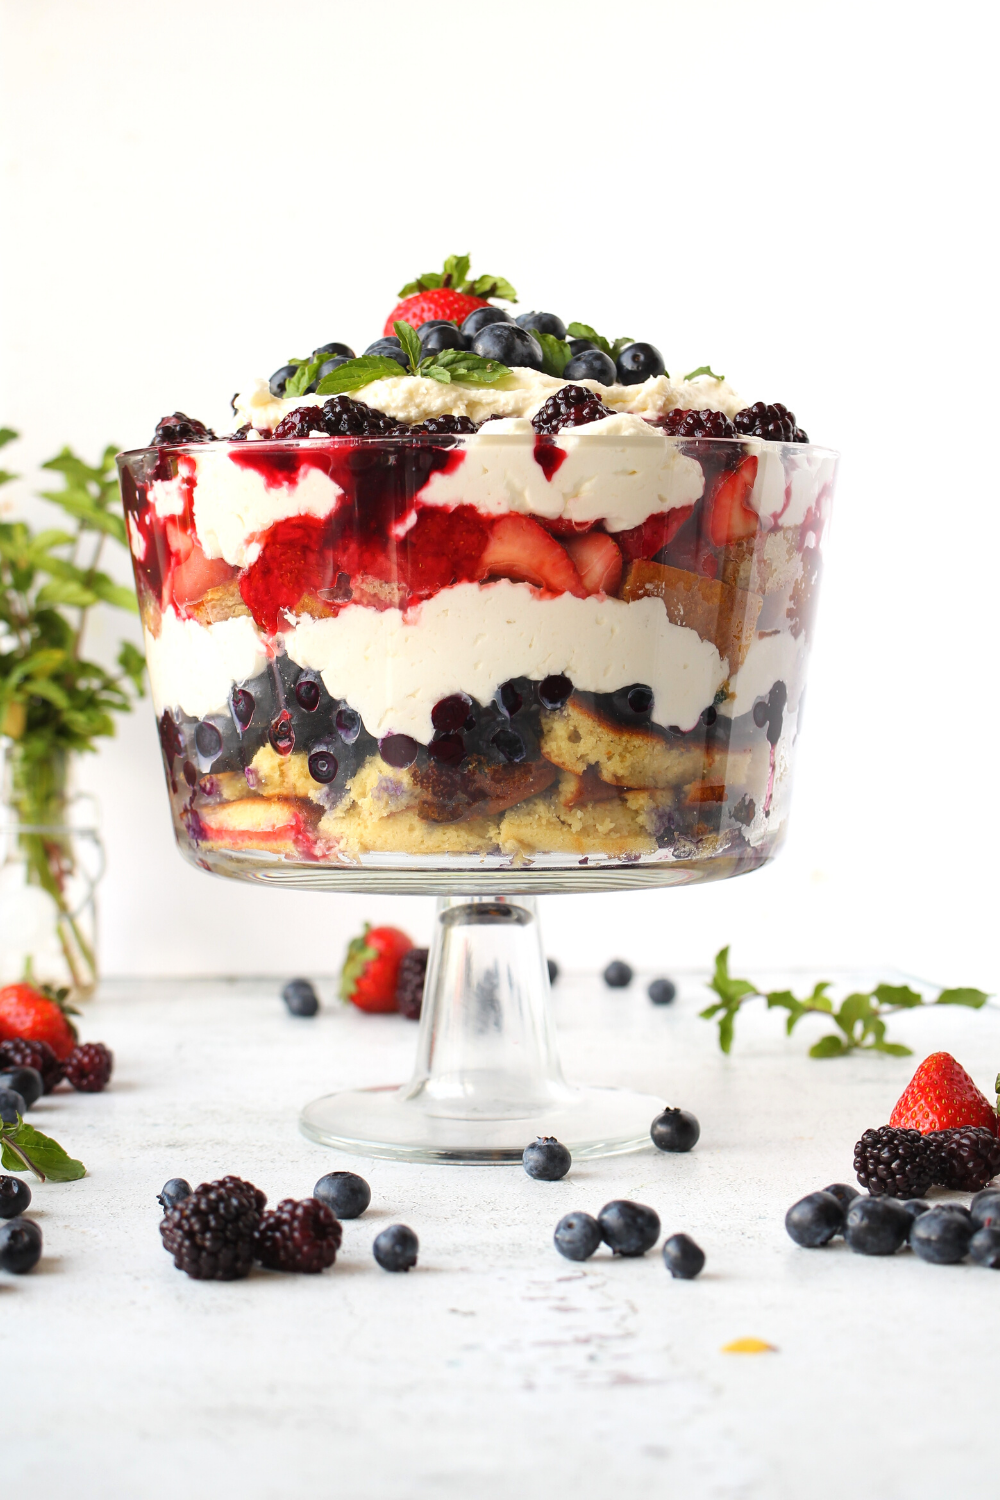 keto trifle with almond sponge cake and layers of red, white and blue summer berries